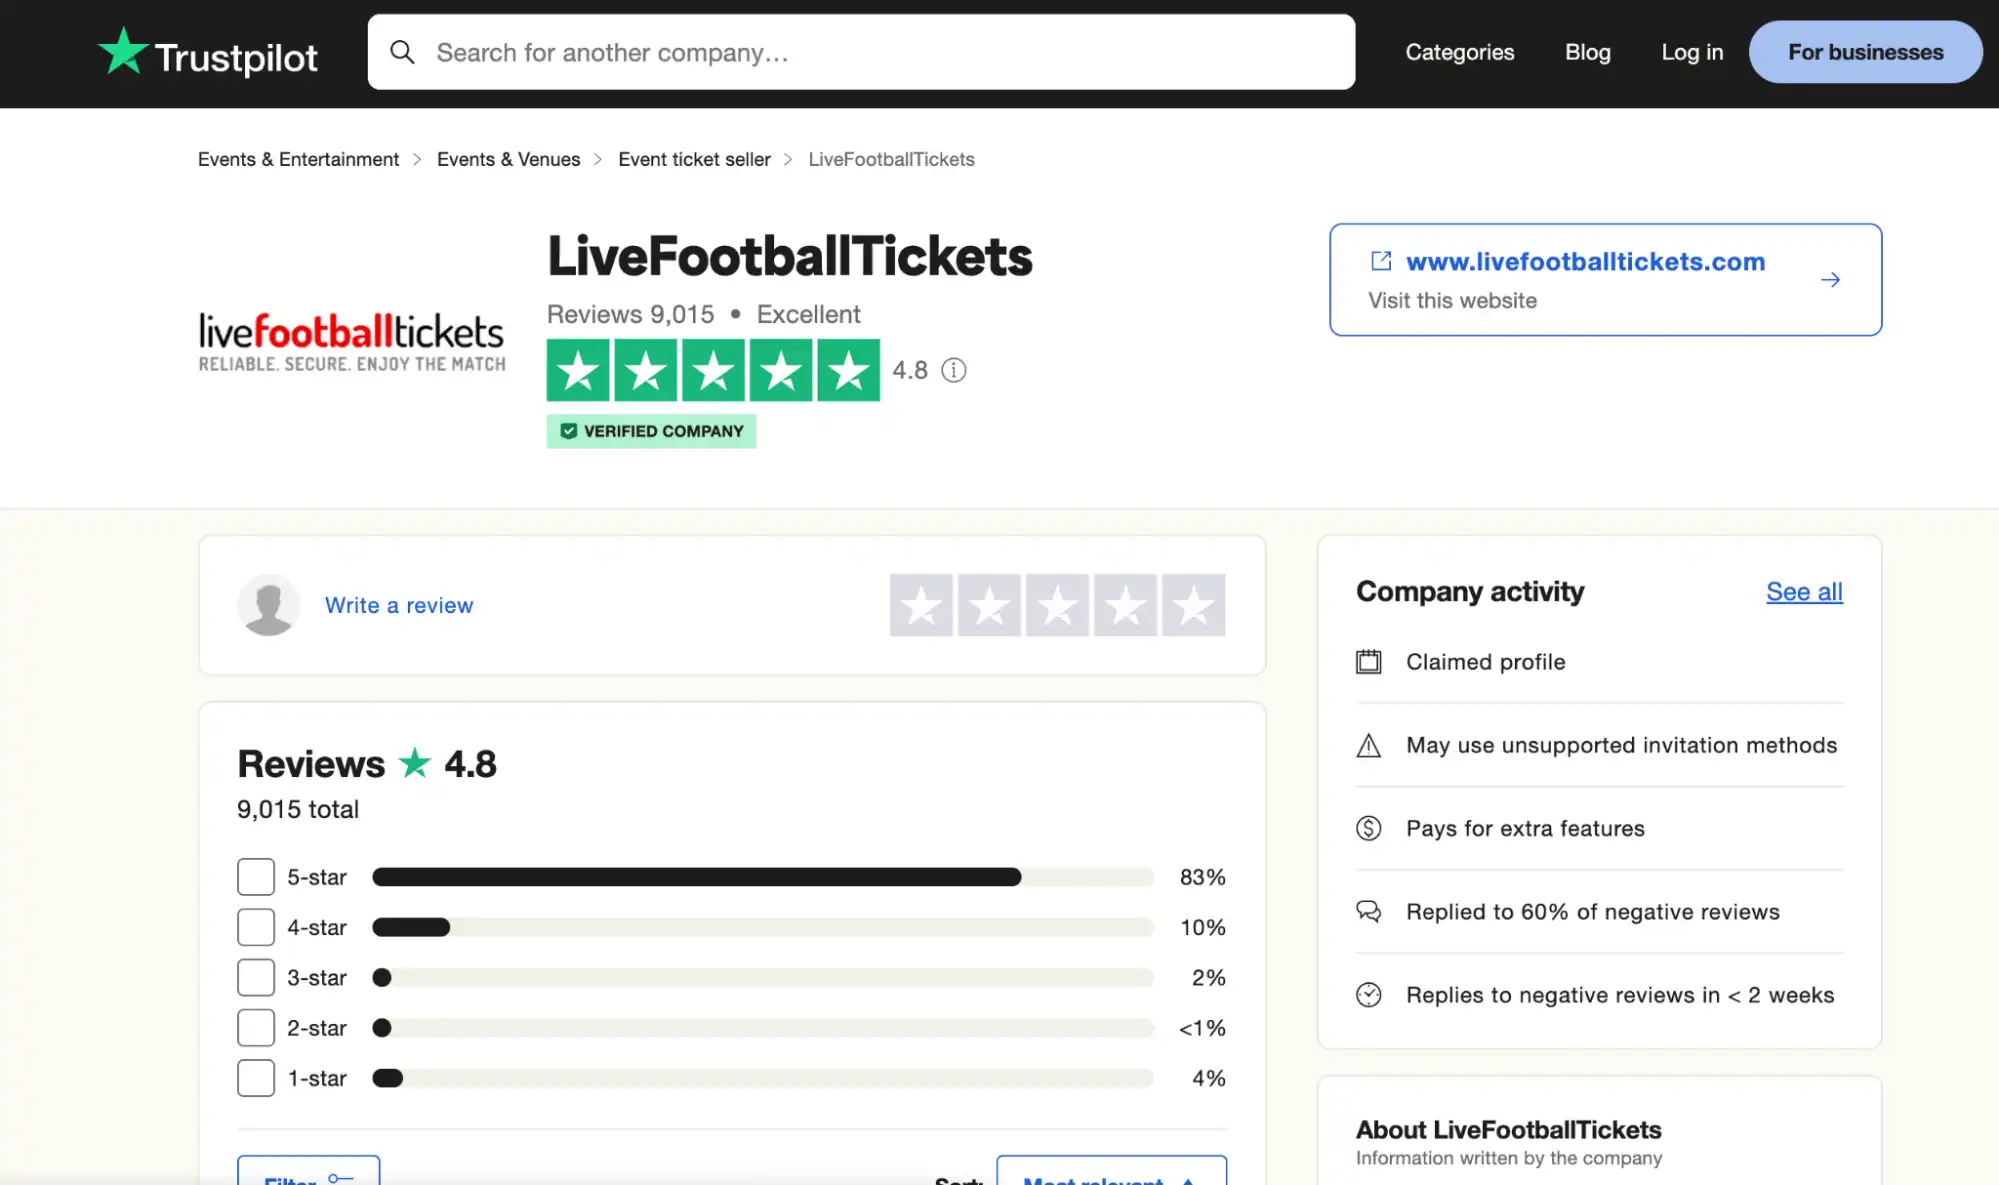 As you can see, LiveFootballTickets has a stellar reputation on Trustpilot.